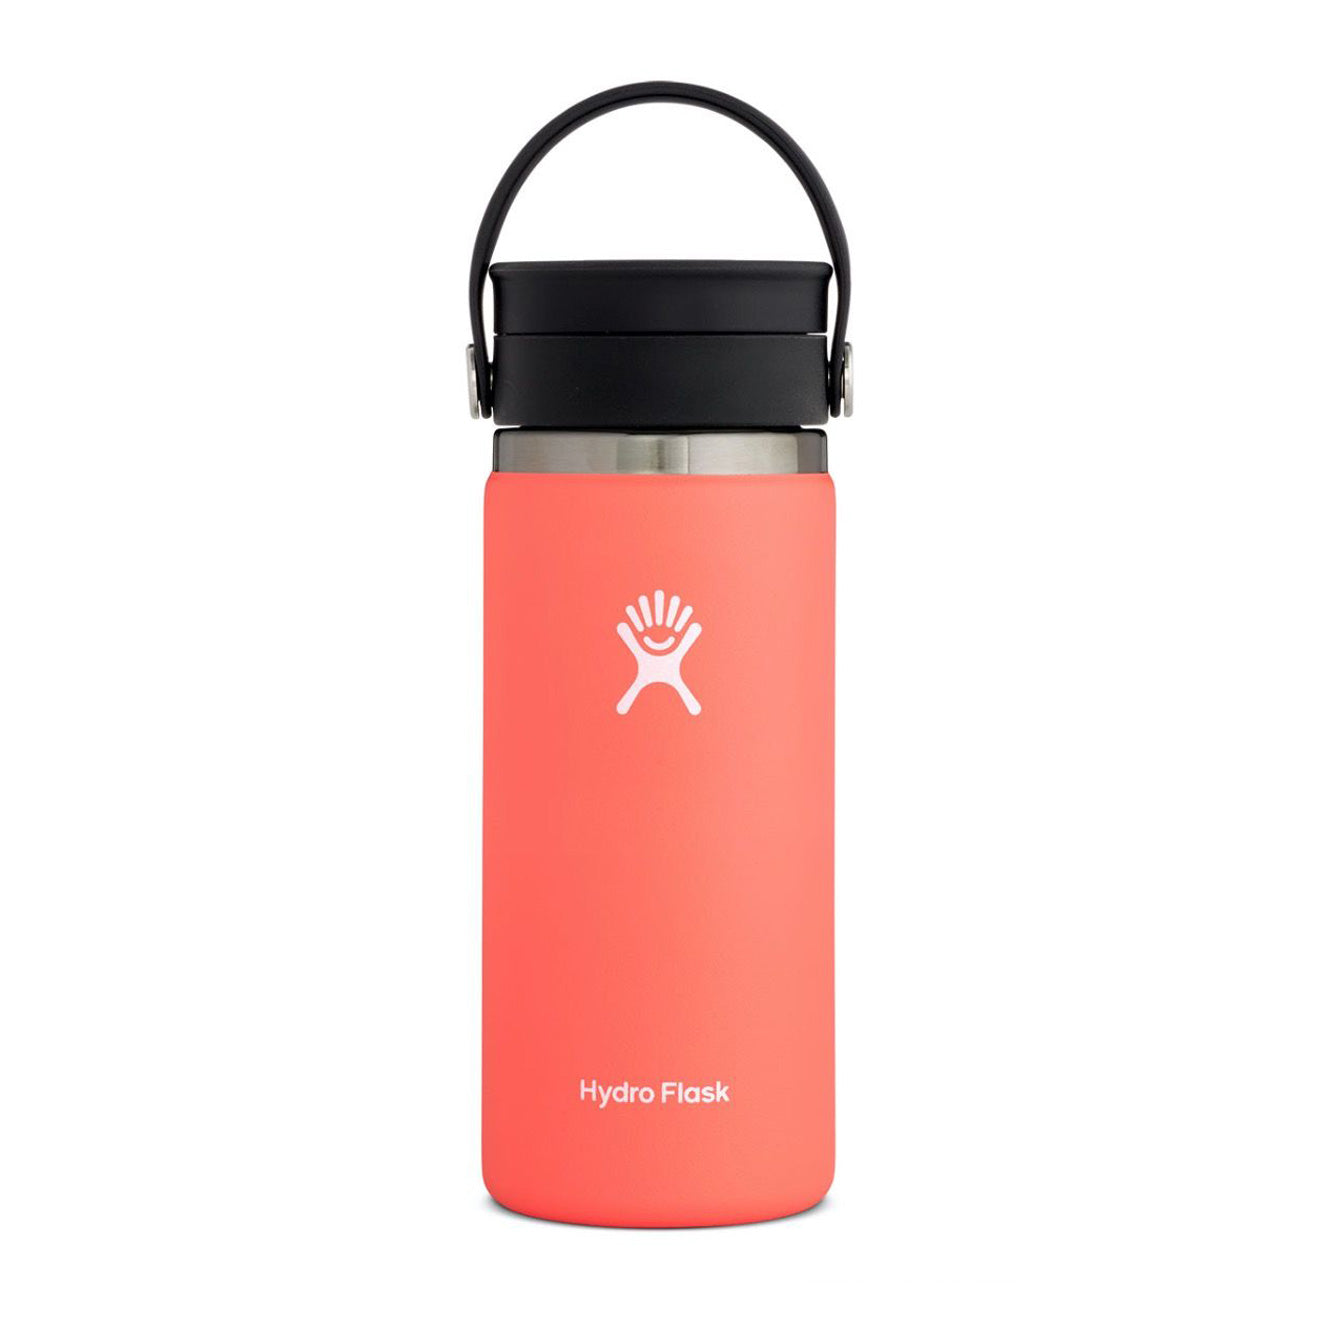 hydro flask 16oz coffee with flex sip lid clearance OLIVE